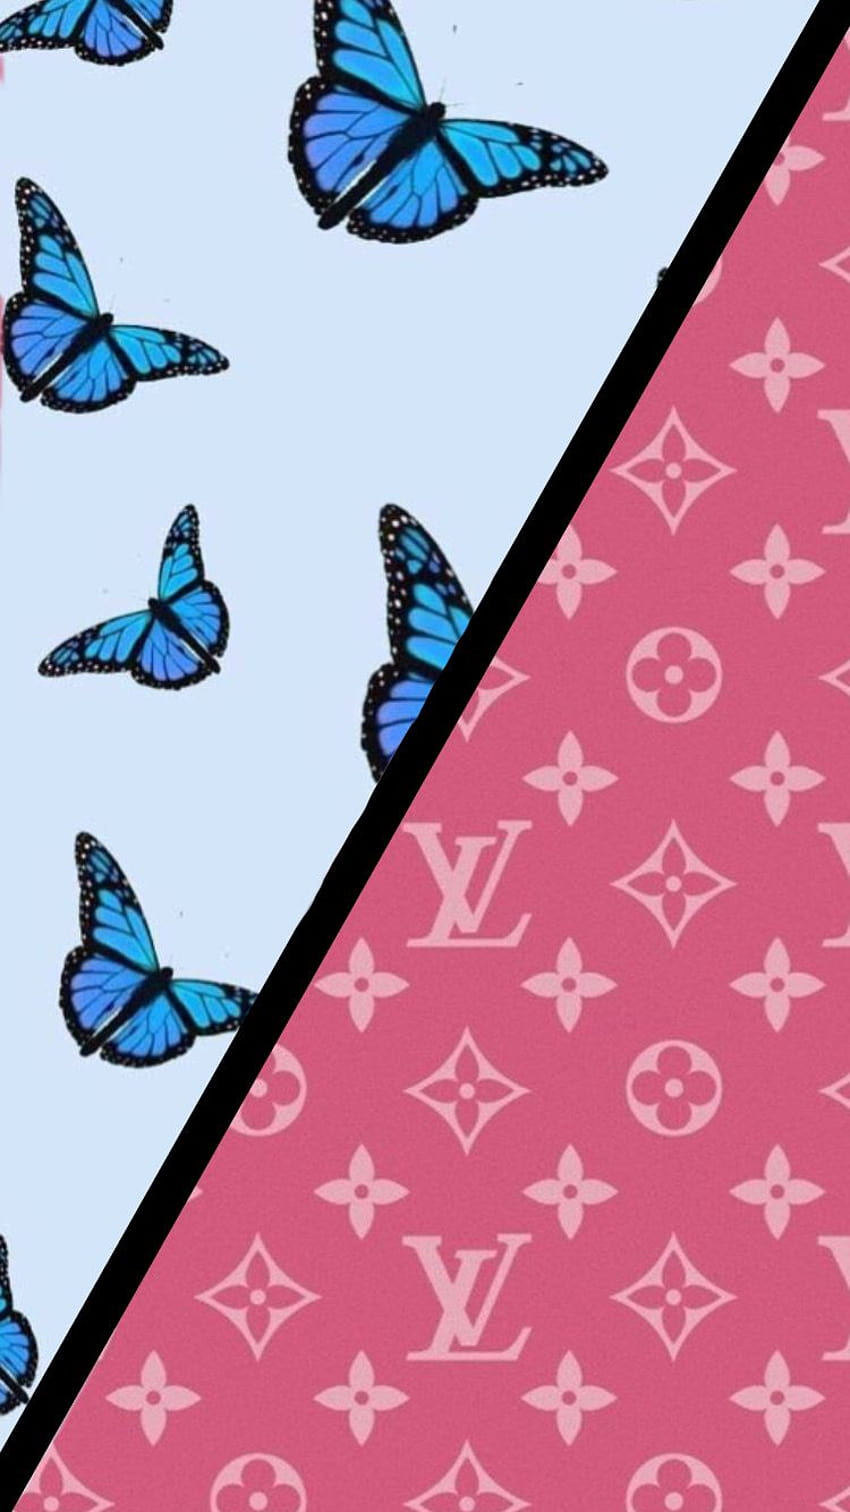 Louis vuitton by me✨. iPhone pattern, Aesthetic iphone , Butterfly iphone, Louis  Vuitton Girl HD phone wallpaper